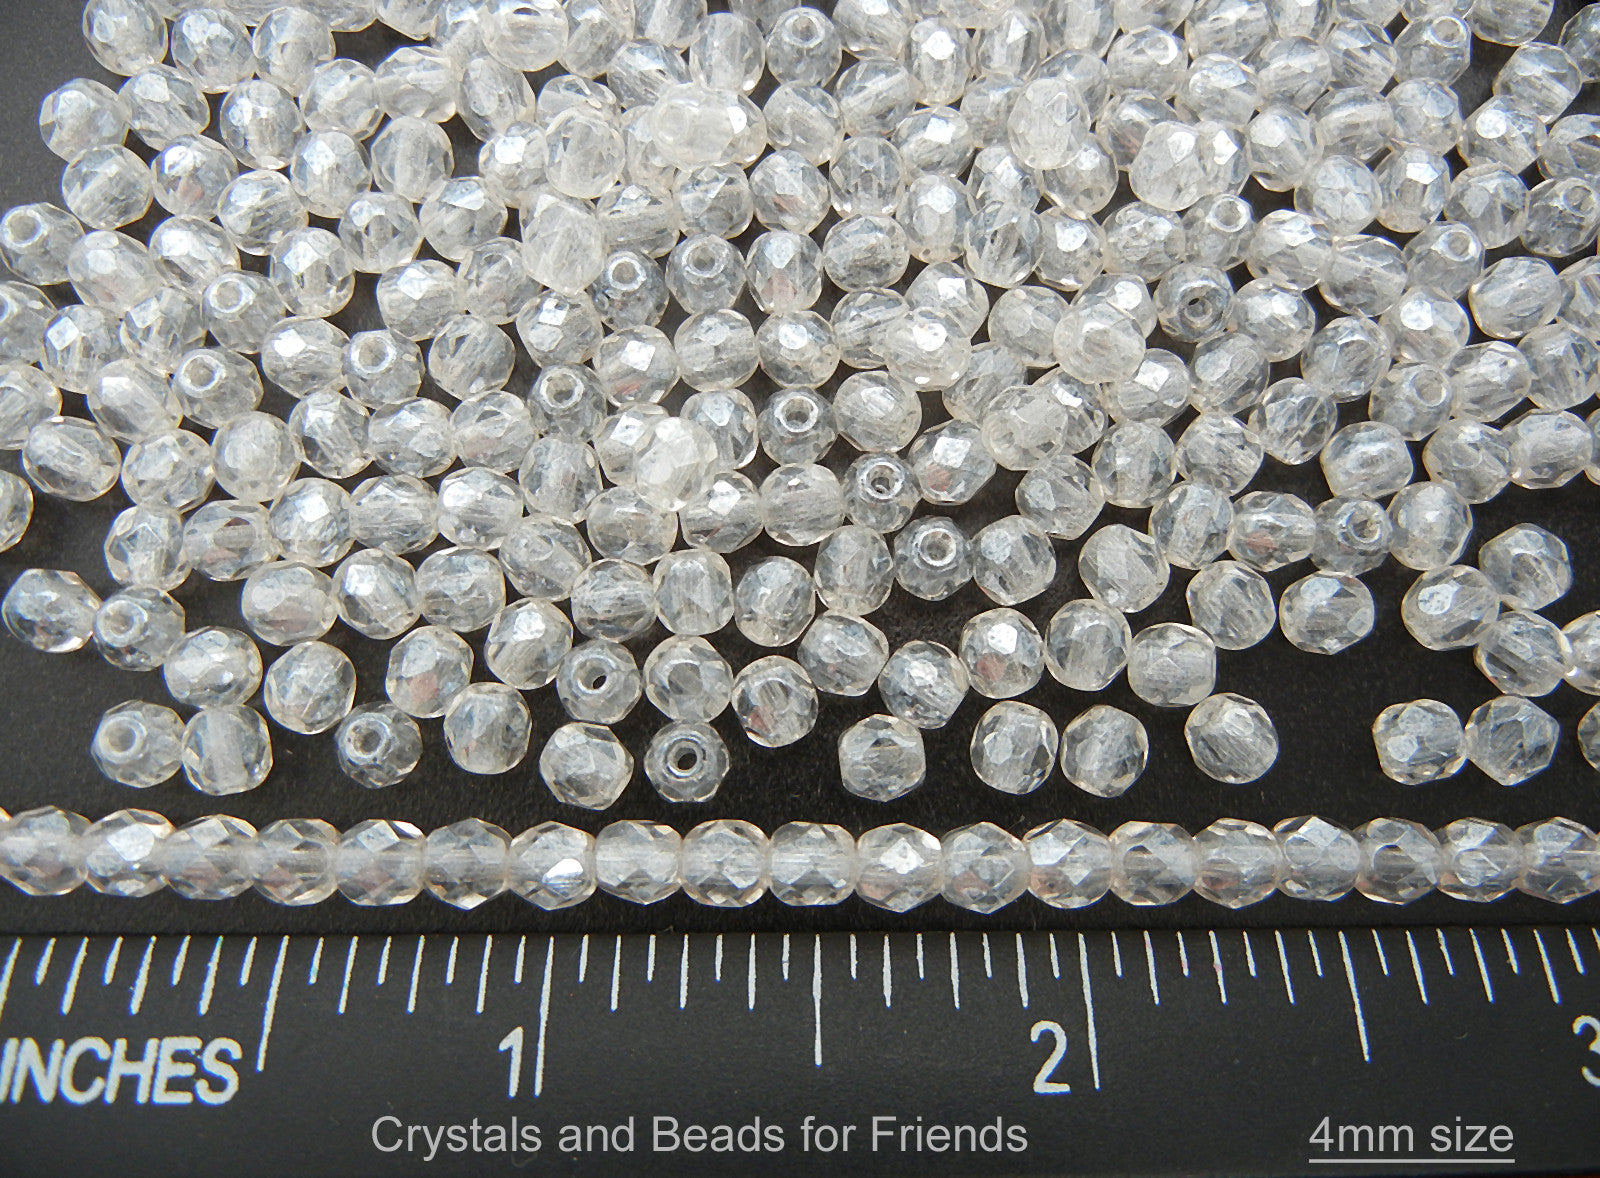 Crystal Hematite White Luster, loose Czech Fire Polished Round Faceted Glass Beads, 3mm, 4mm, 6mm, 8mm